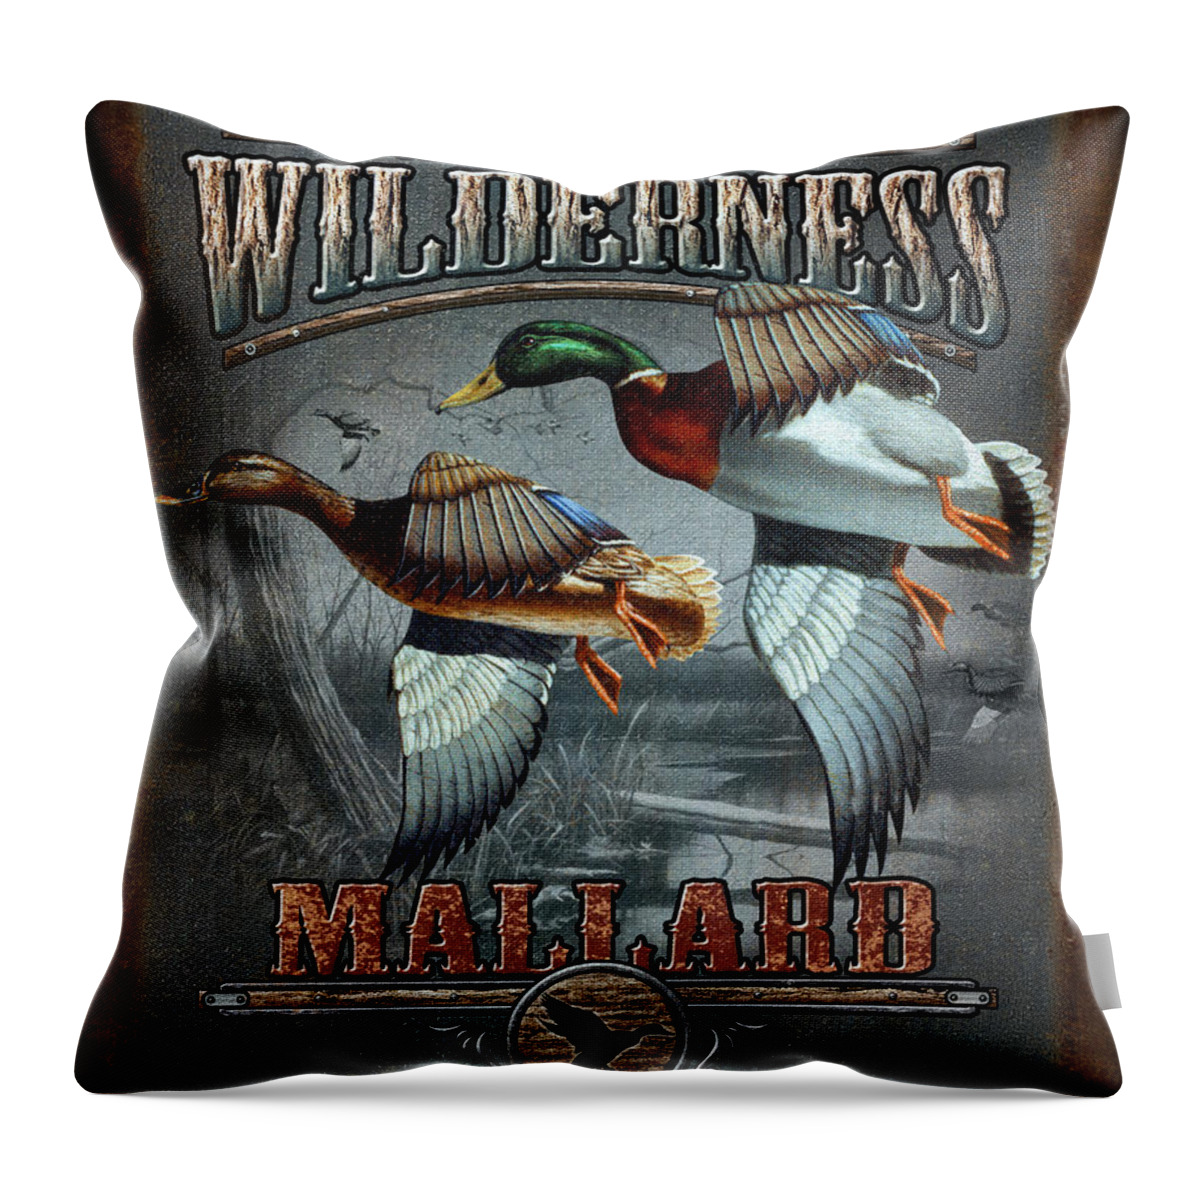 Bruce Miller Throw Pillow featuring the painting Wilderness mallard by JQ Licensing